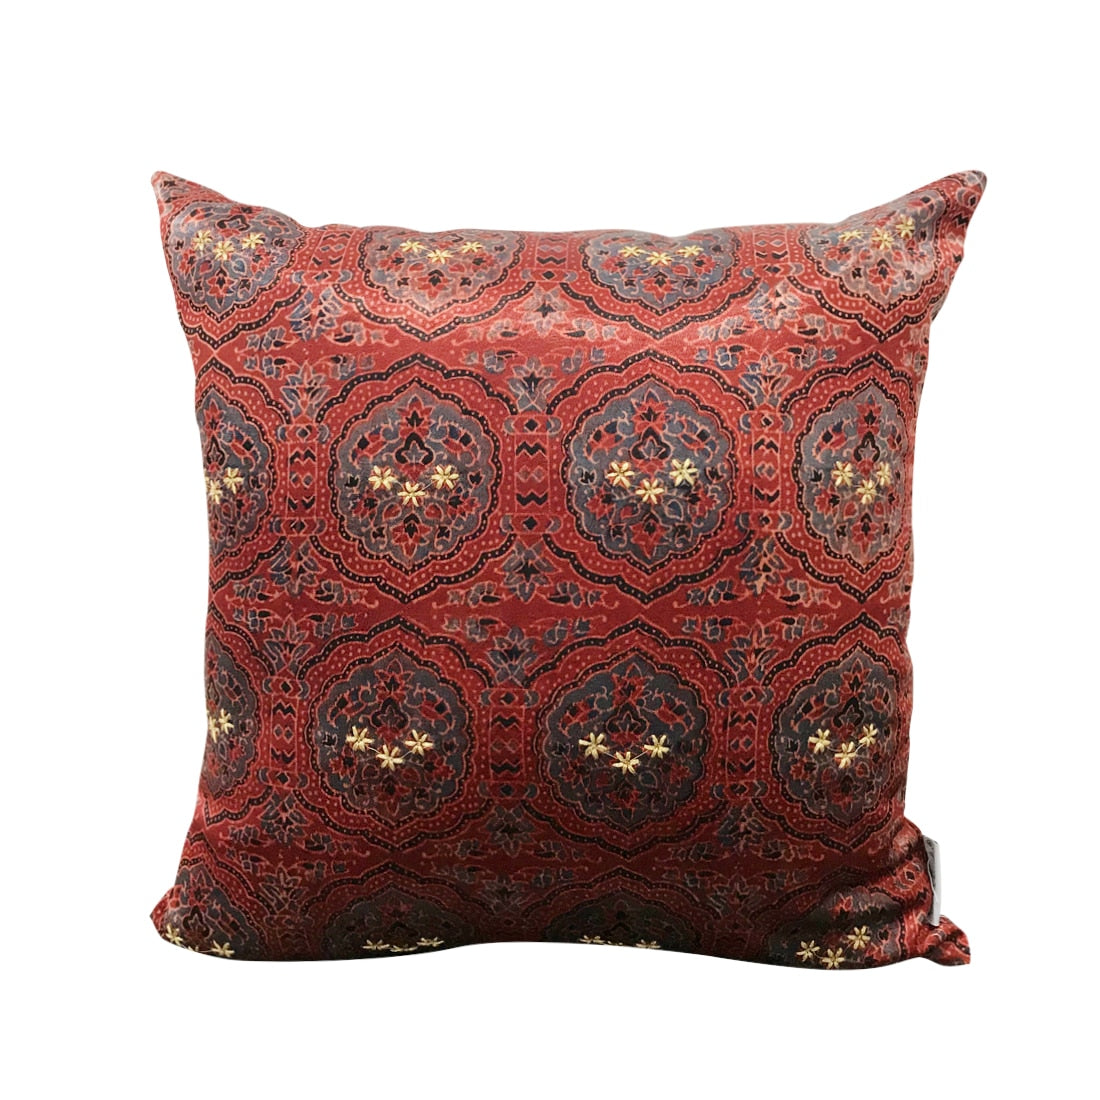 Floral Ajrakh Printed Sofa Cushion Cover Decorative Pillow Case 16x16, Maroon…